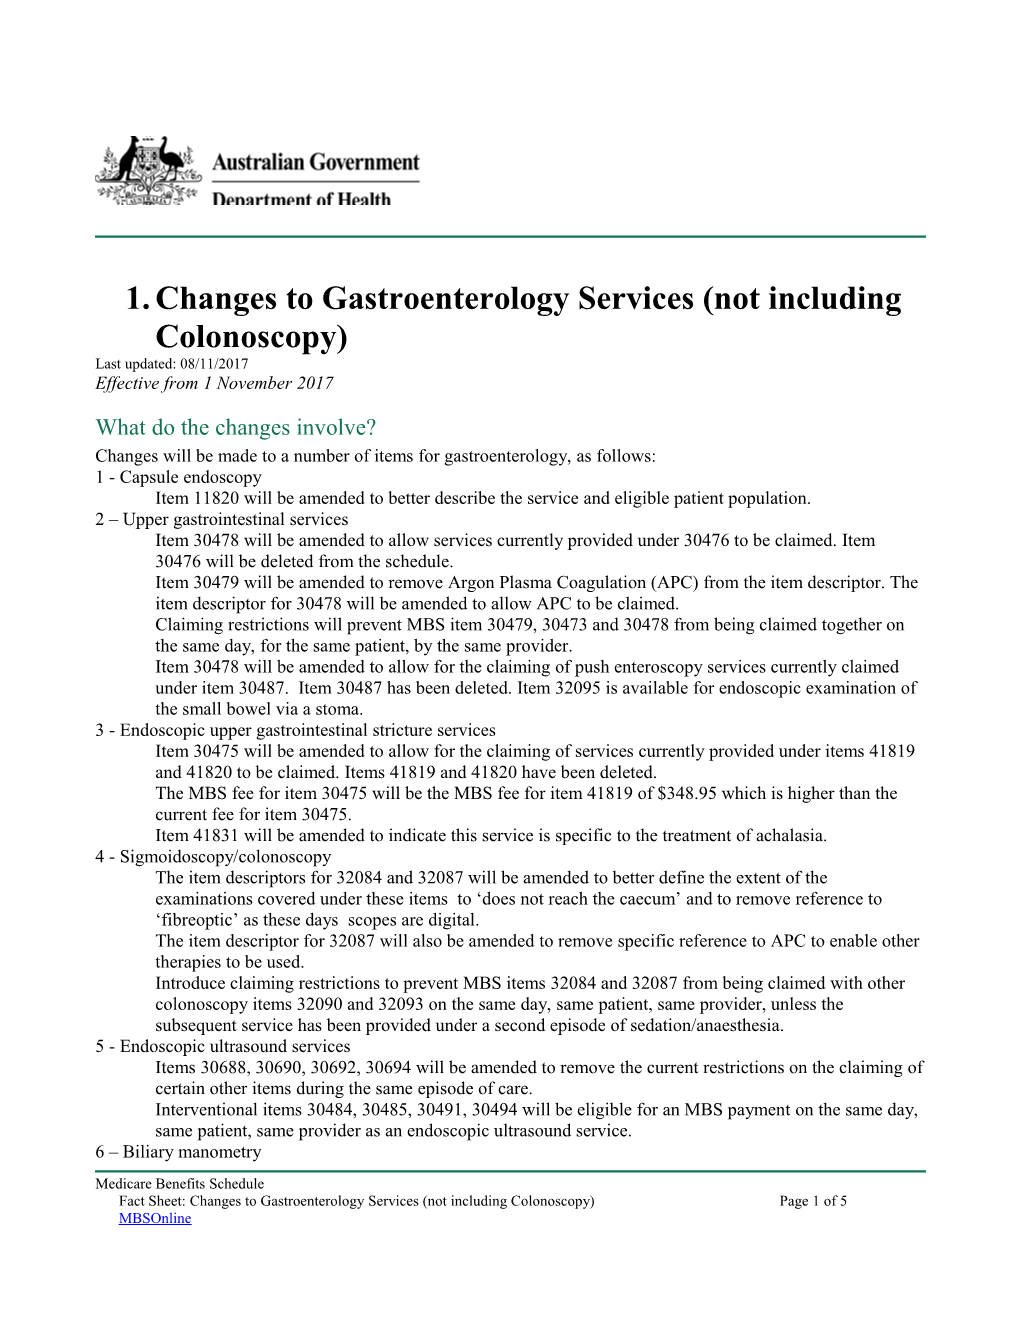 Changes to Gastroenterology Services (Not Including Colonoscopy)